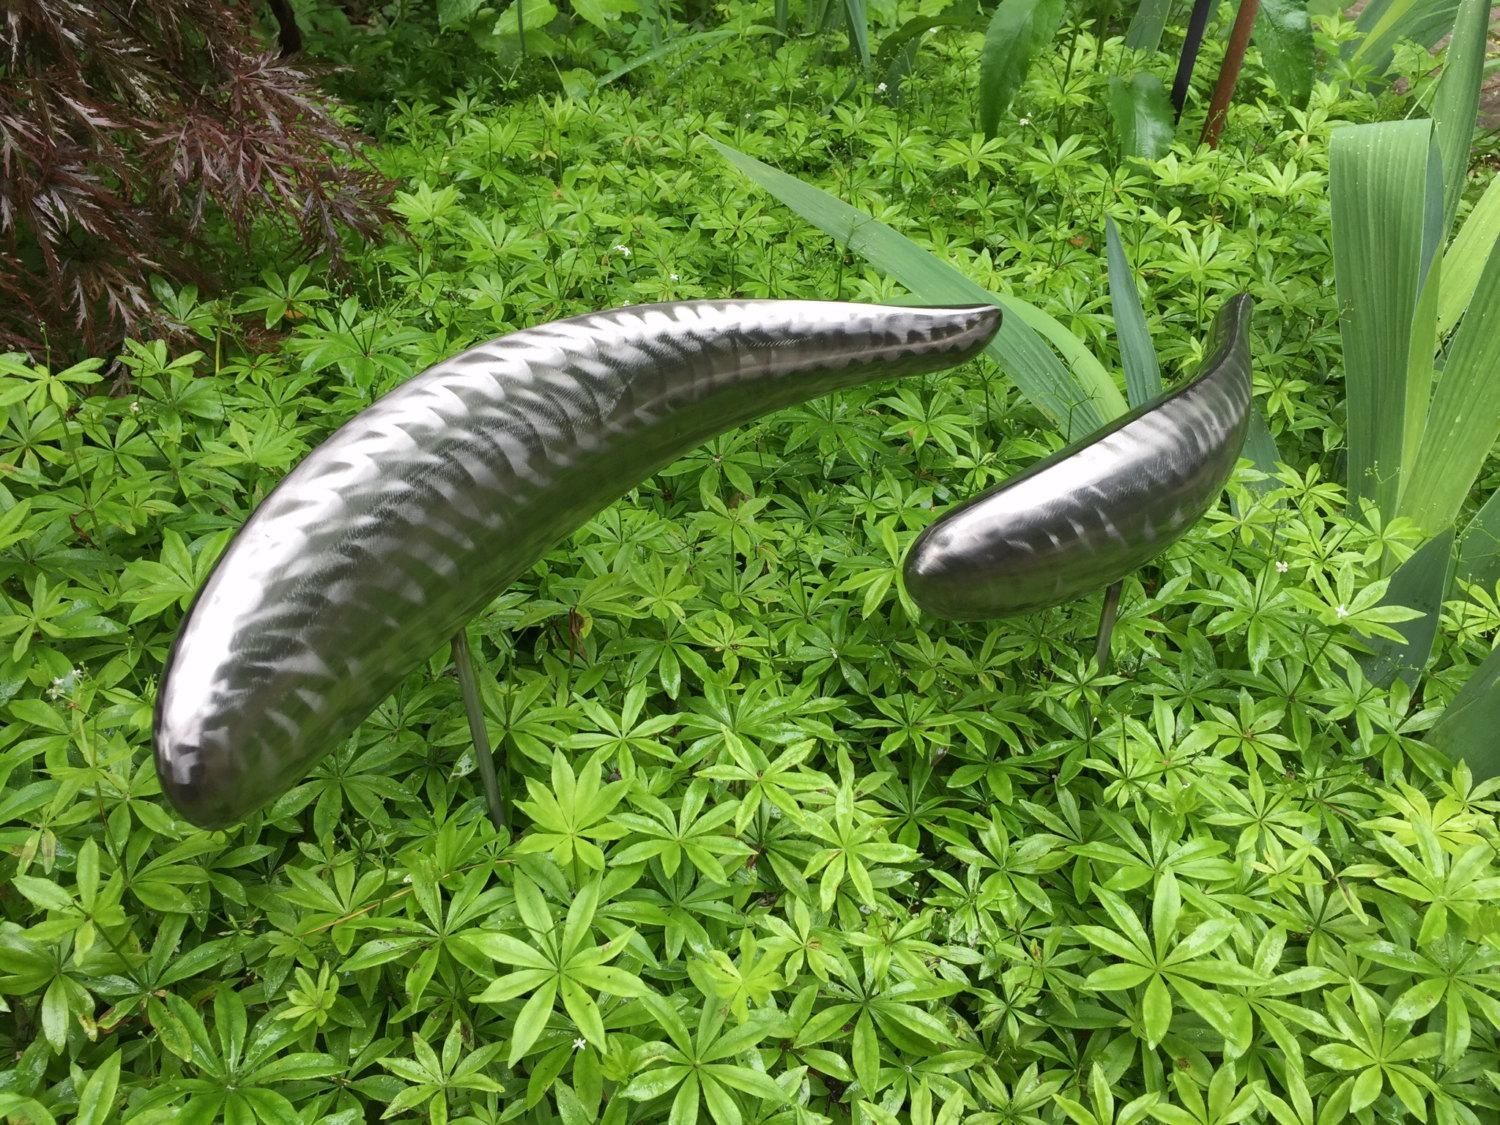 Stainless Steel Fish Sculpture For Garden Landscape Welded Inside Stainless Steel Fish Wall Art (View 4 of 20)